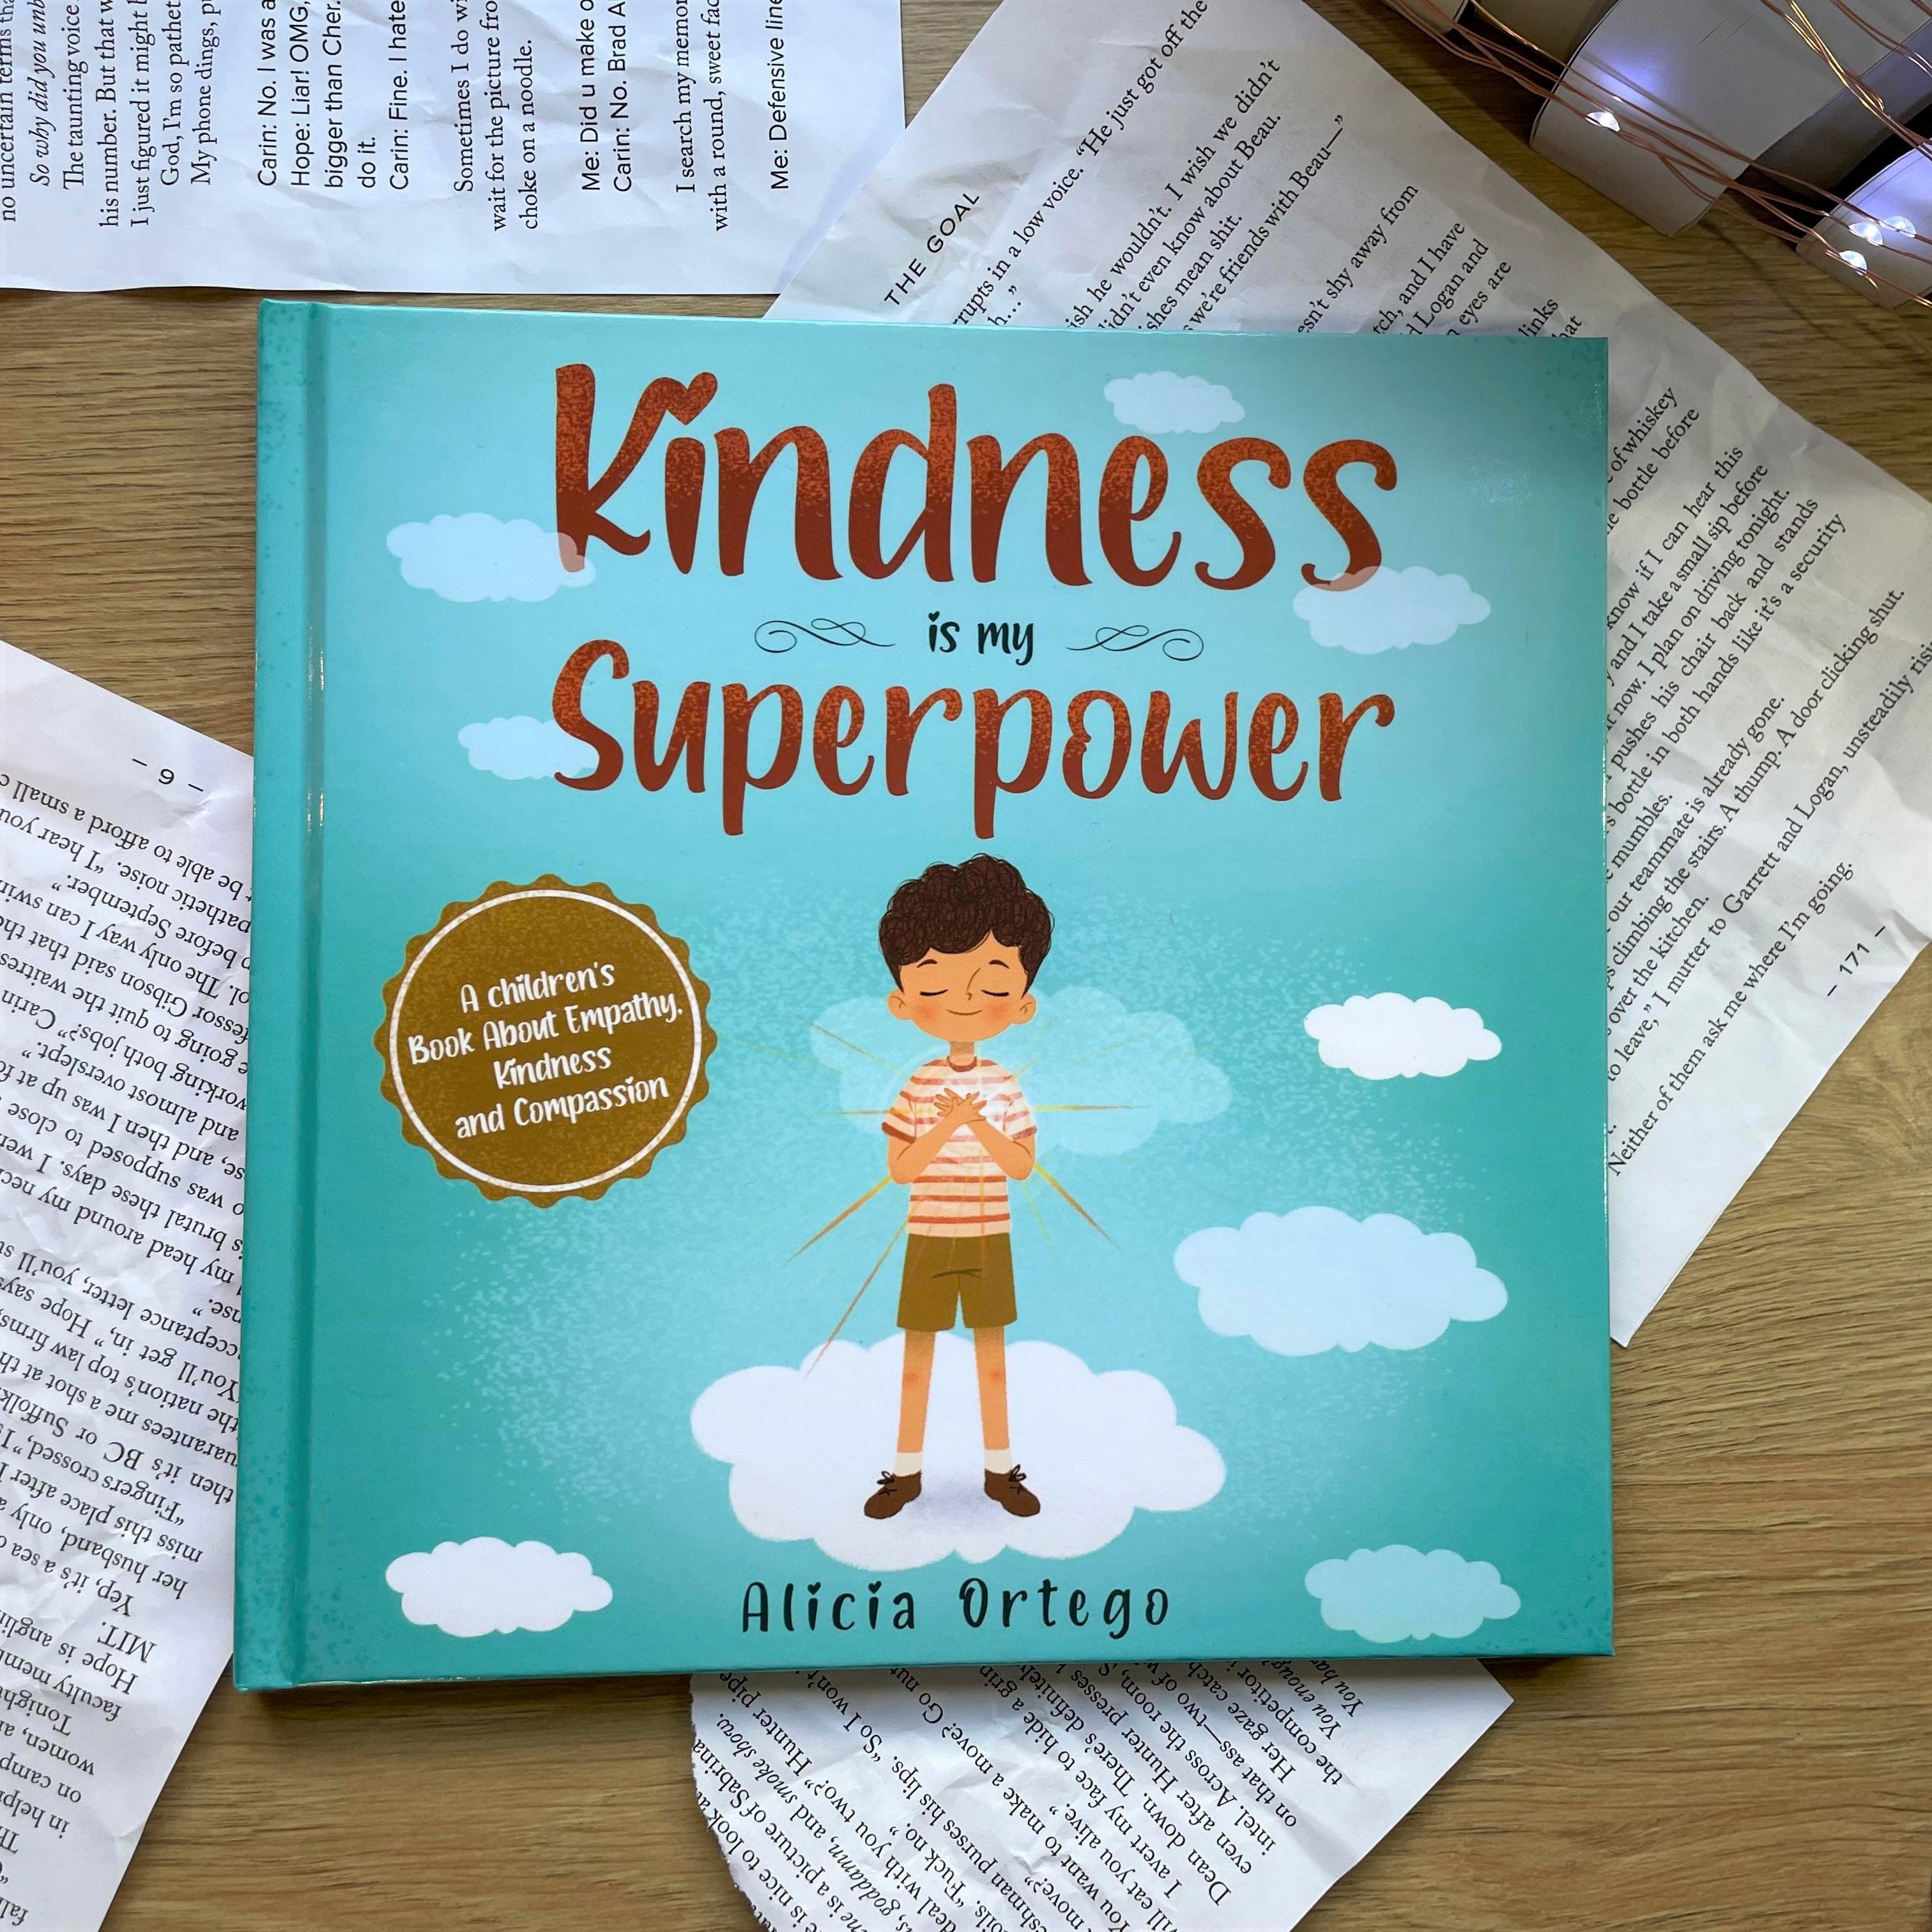 Kindness is my Superpower by Alicia Ortego